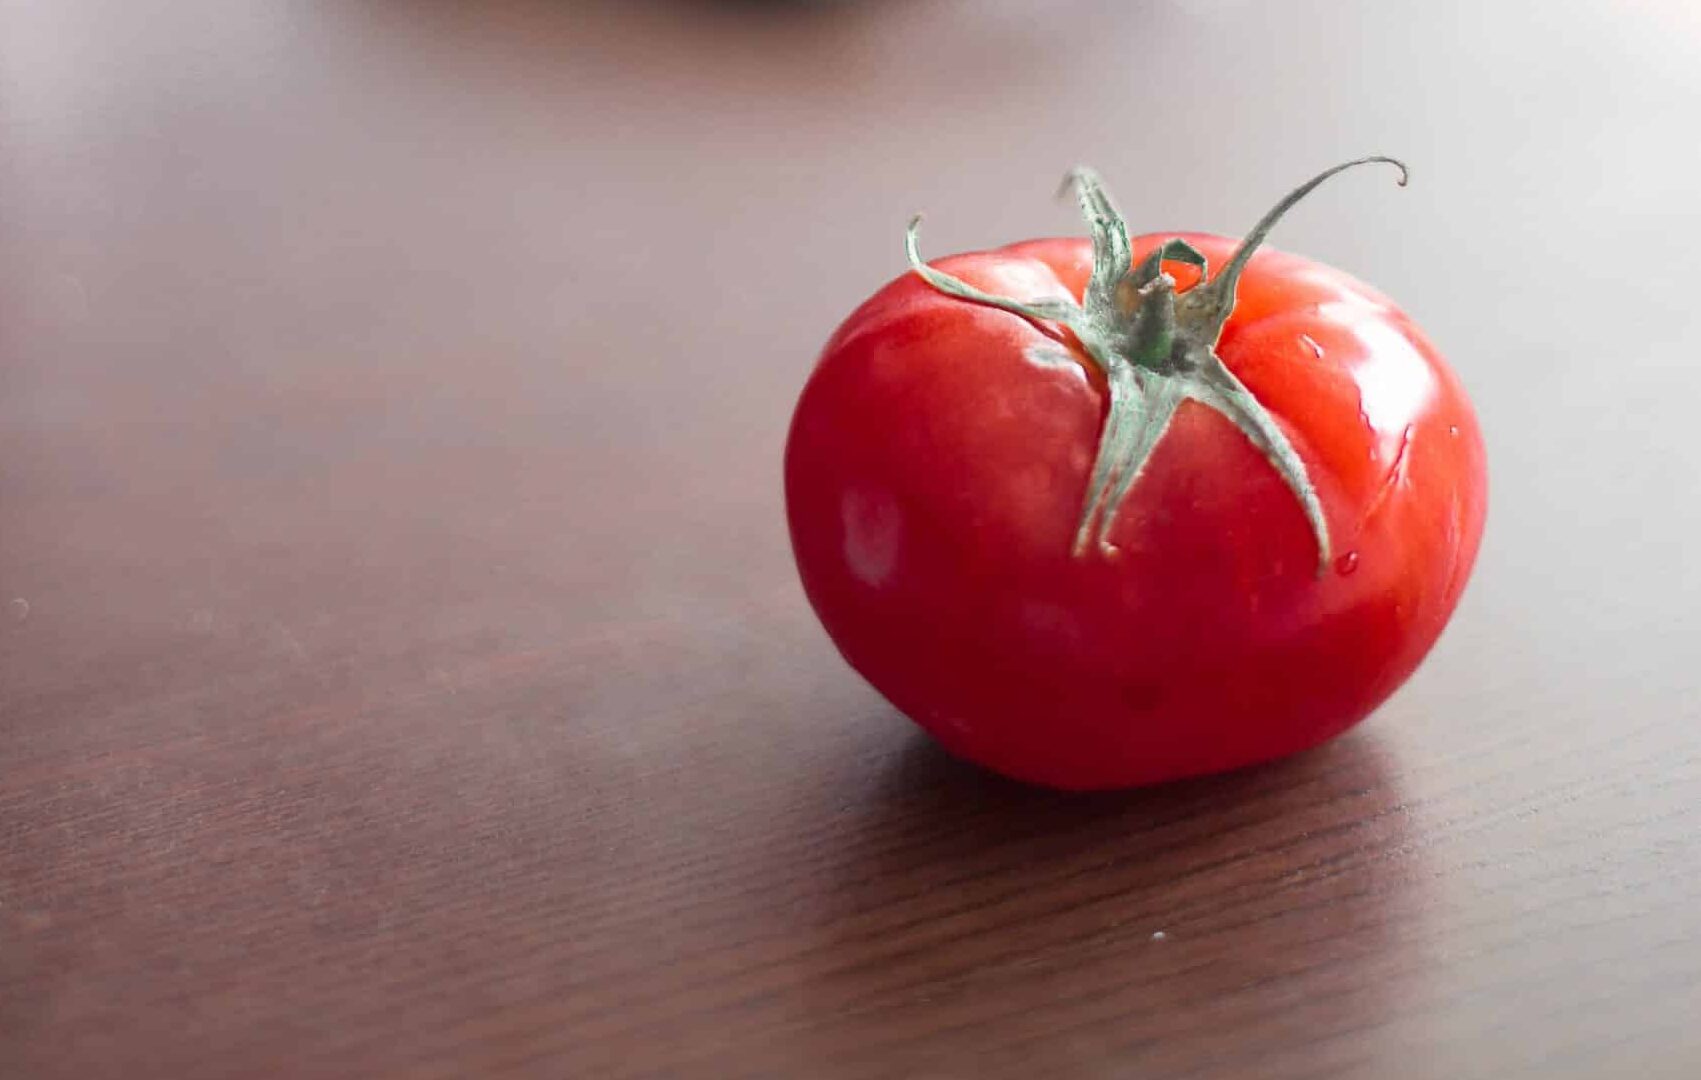 Image of a tomato on a desk